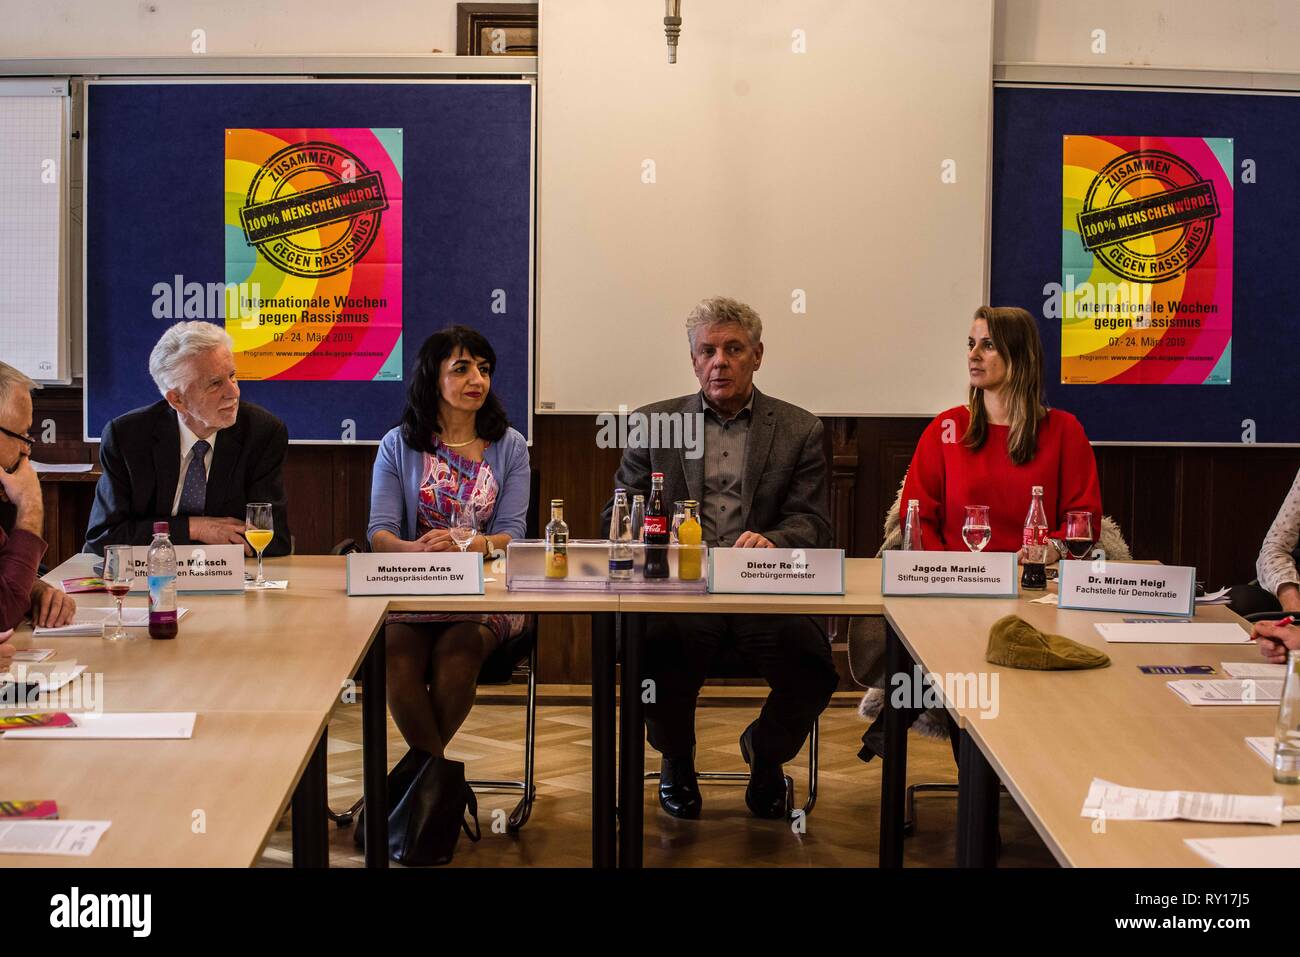 Munich, Bavaria, Germany. 11th Mar, 2019. L-R Dr. JUERGEN MICKSCH, Vorstand Stiftung gegen Rassismus, MUHTEREM ARAS, president of the Baden-Wuerttemberg Landtag and the Boschafterin der Internationalen Wochen gegen Rassismus 2019, DIETER REITER, Mayor (Oberbuergermeister) of the city of Munich, Germany, JAGODA MARINIC, author from the Stiftung gegen Rassismus. Munich Mayor Dieter Reiter held a press conference to kick off the start of the annual International Weeks Against Racism at the Munich Rathaus (City Hall). During this time, there is a high density of events, such as conferences, sem Stock Photo